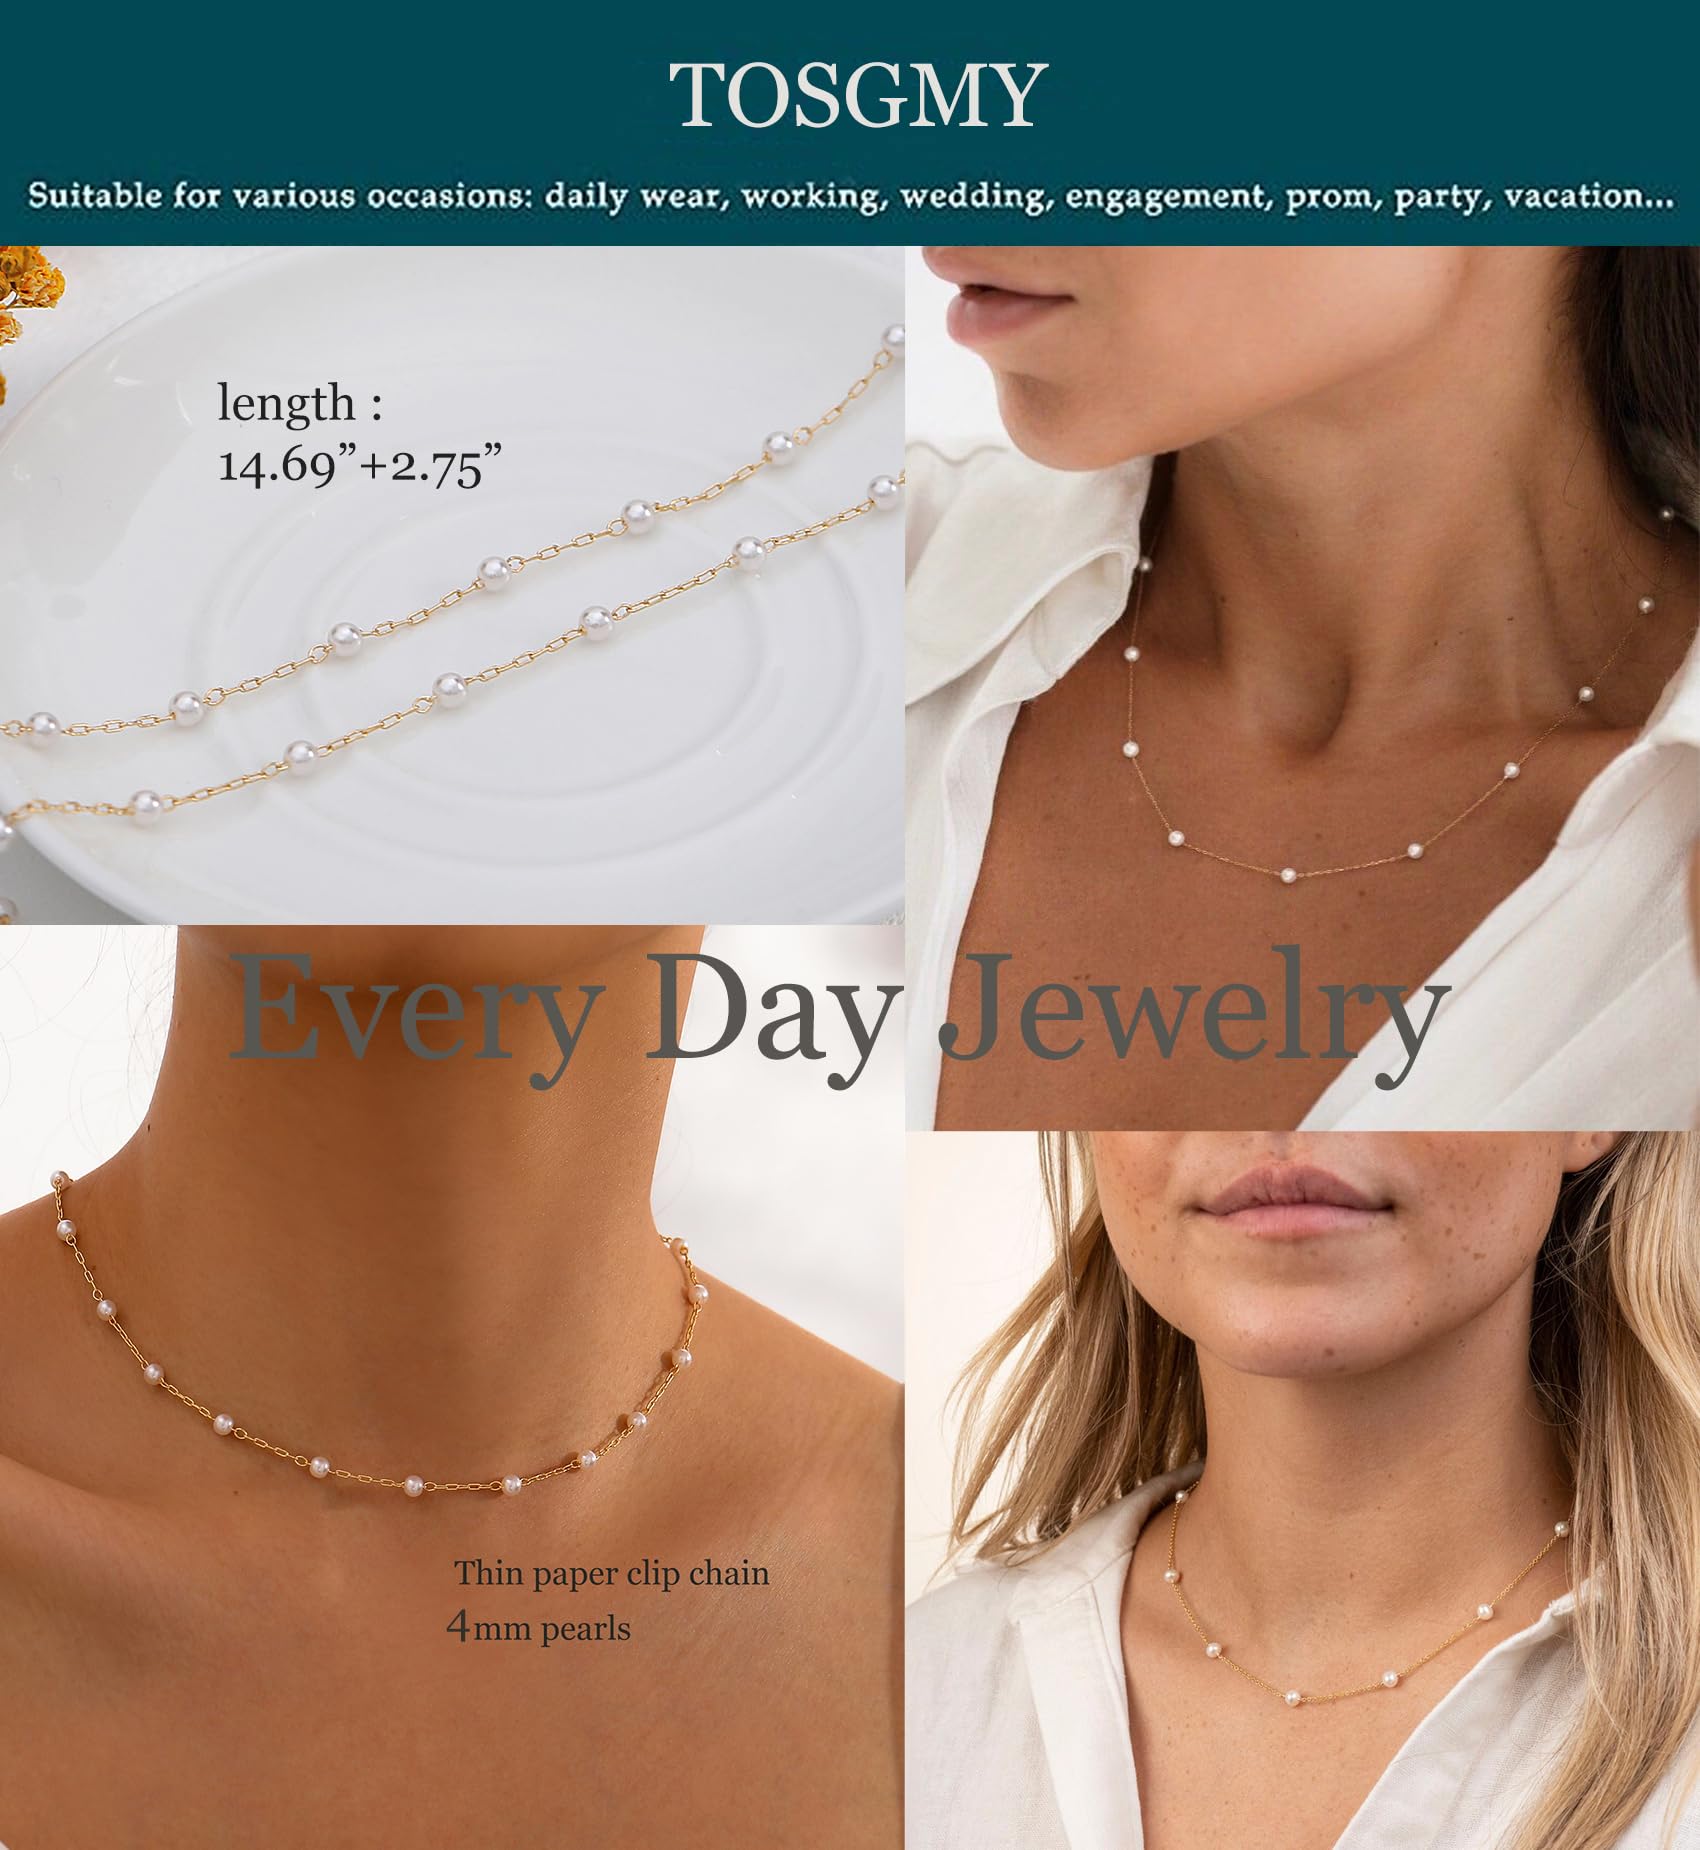 TOSGMY Pearl Necklaces For Women,14K Gold Plated Pearl Choker Dainty Gold Necklace Handmade Faux Pearl Necklace Trendy Pearls Necklace For Women Girls Simple Wedding Prom Bridal Pearls Jewelry